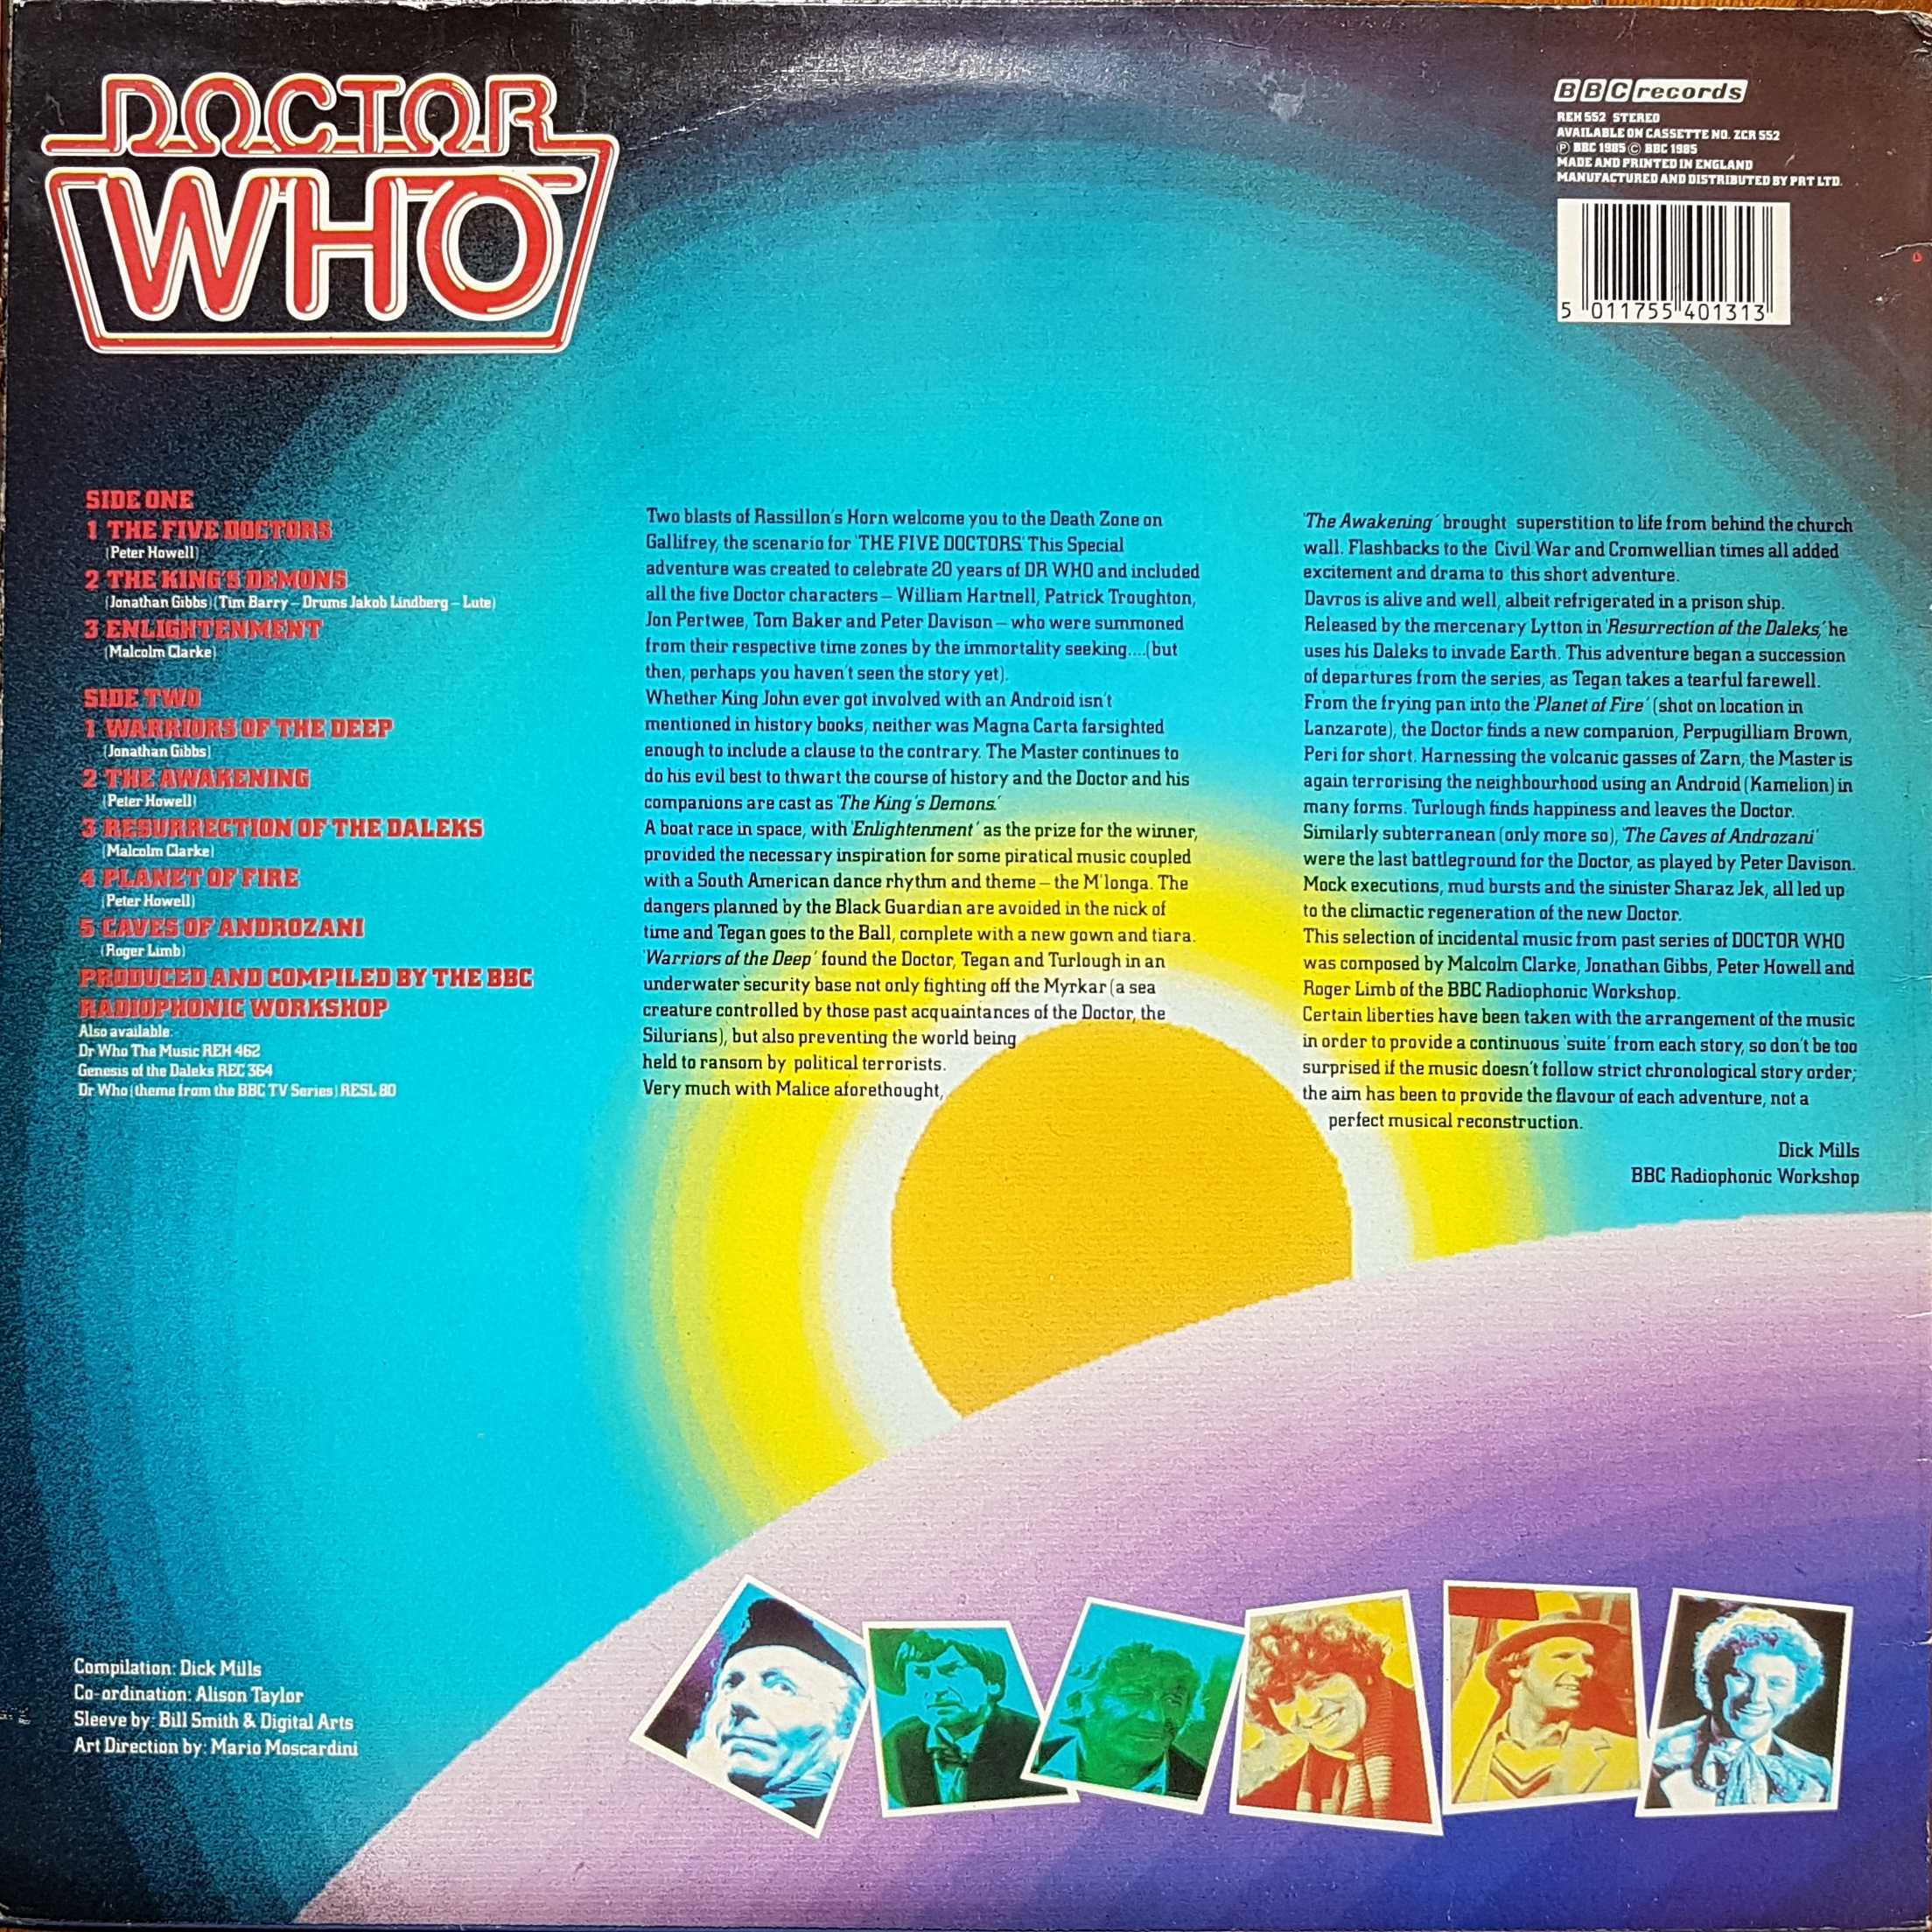 Picture of REH 552 Doctor Who - The music II by artist Various from the BBC records and Tapes library